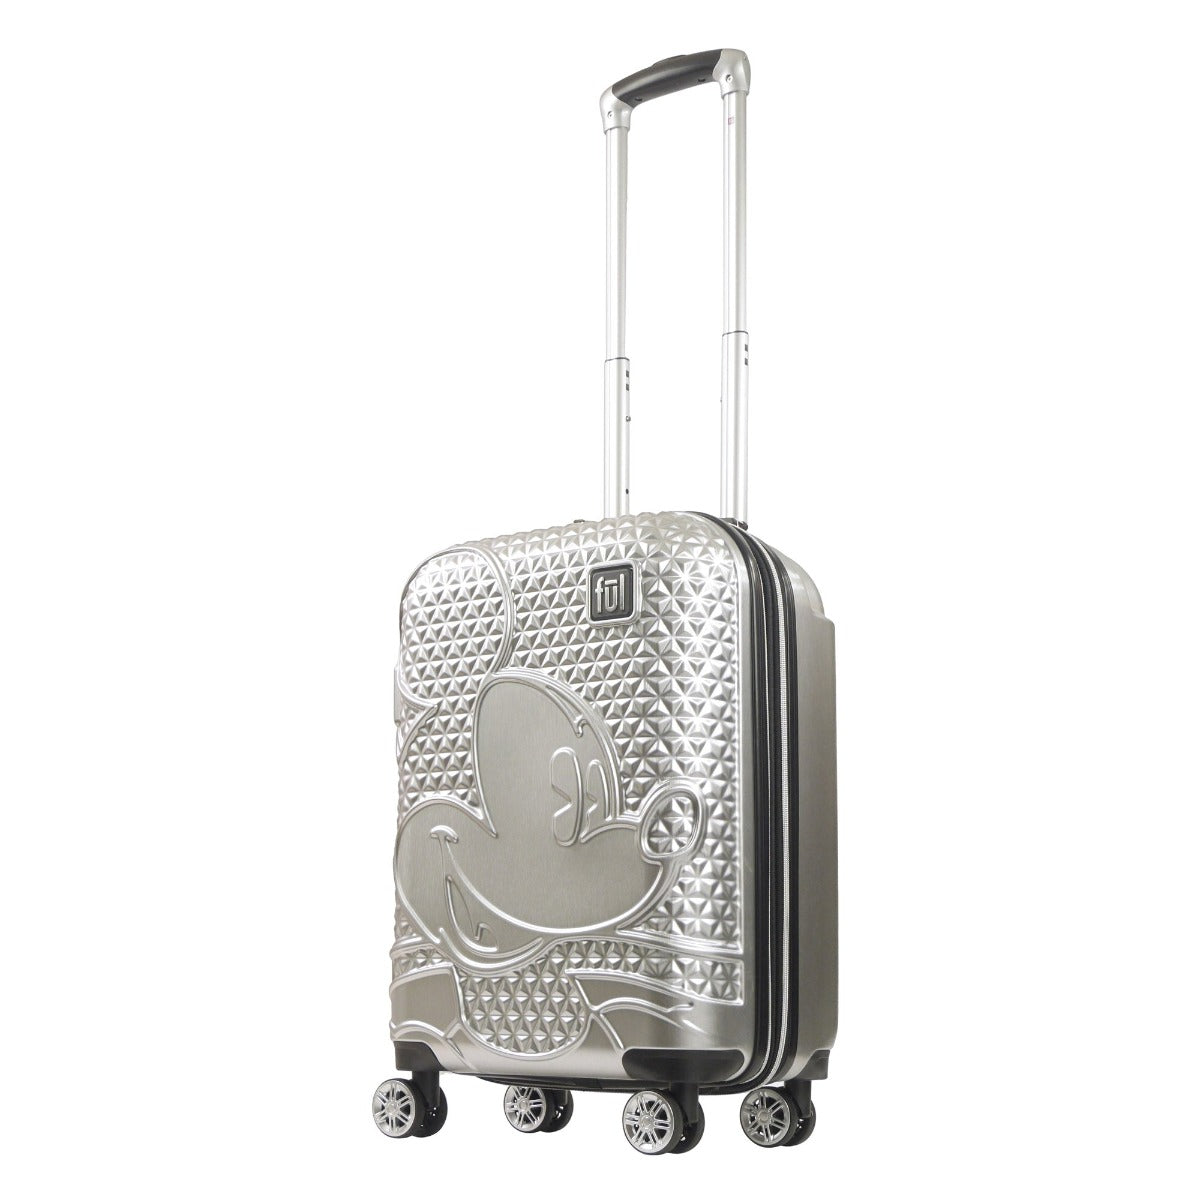 Ful Disney Textured Mickey Mouse 21 Hardside Rolling Luggage - Silver